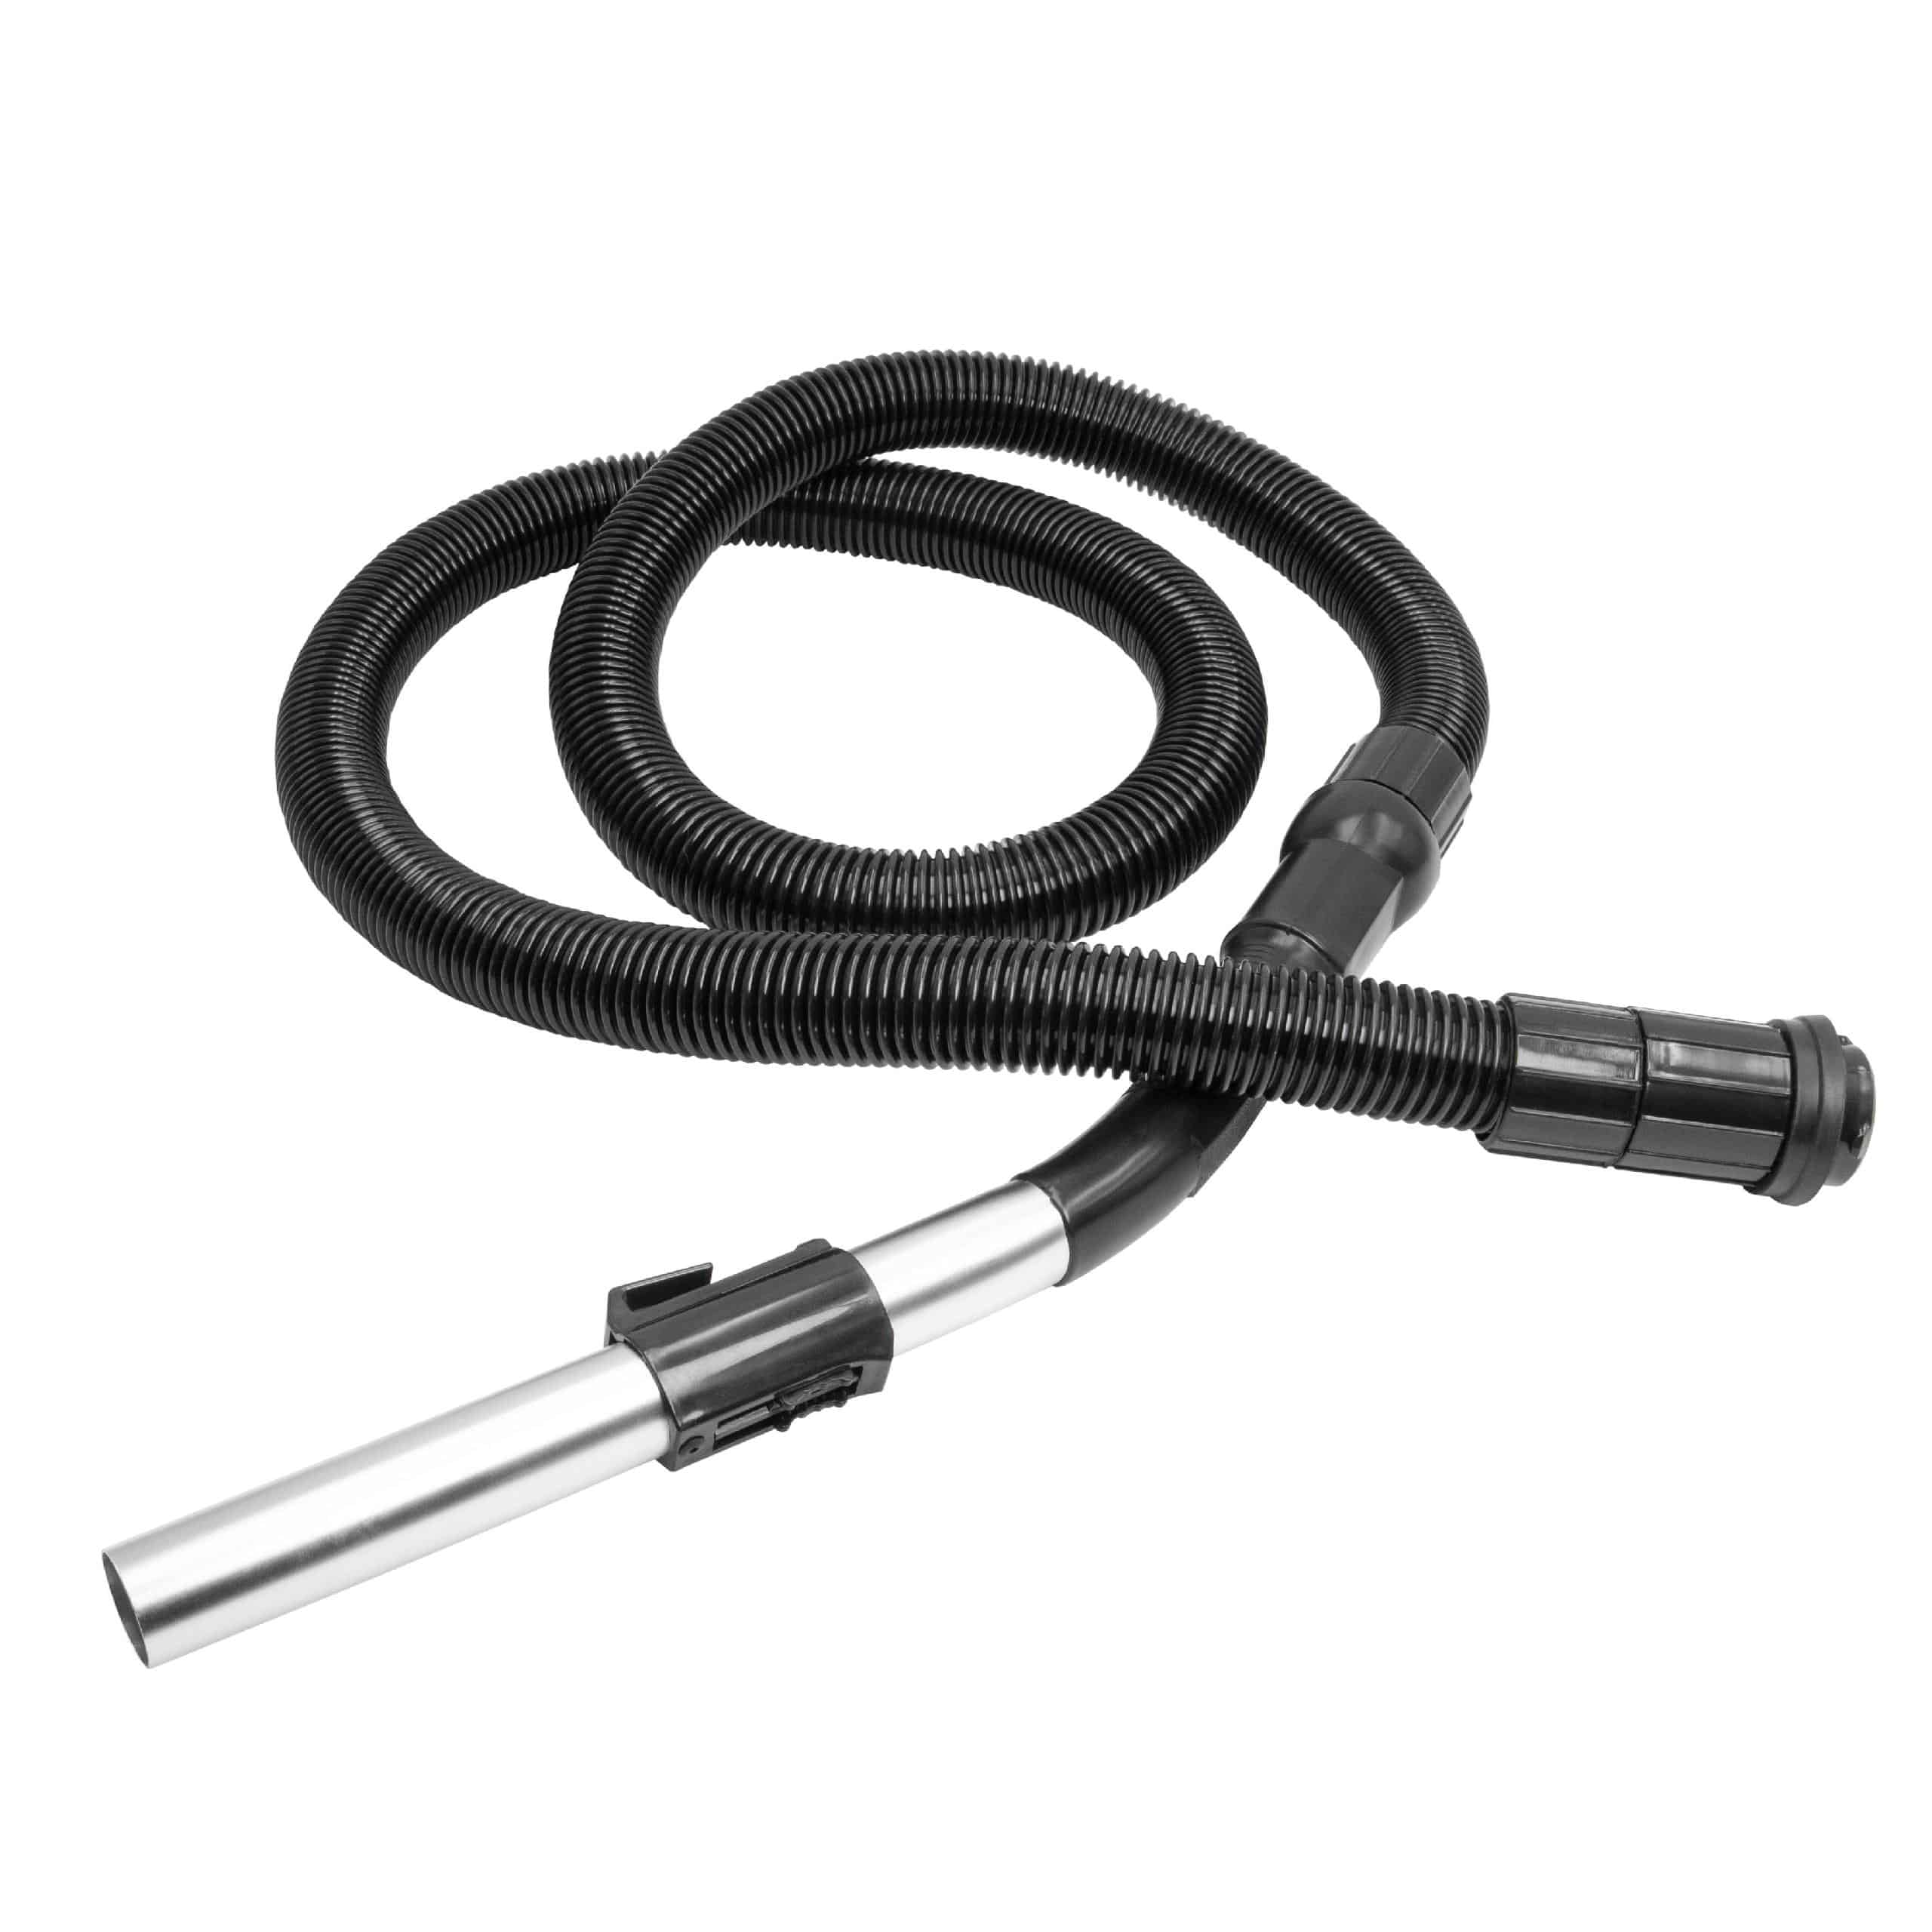 Hose as Replacement for Nilfisk 140 2782 000 - 241 cm long (with Handle)